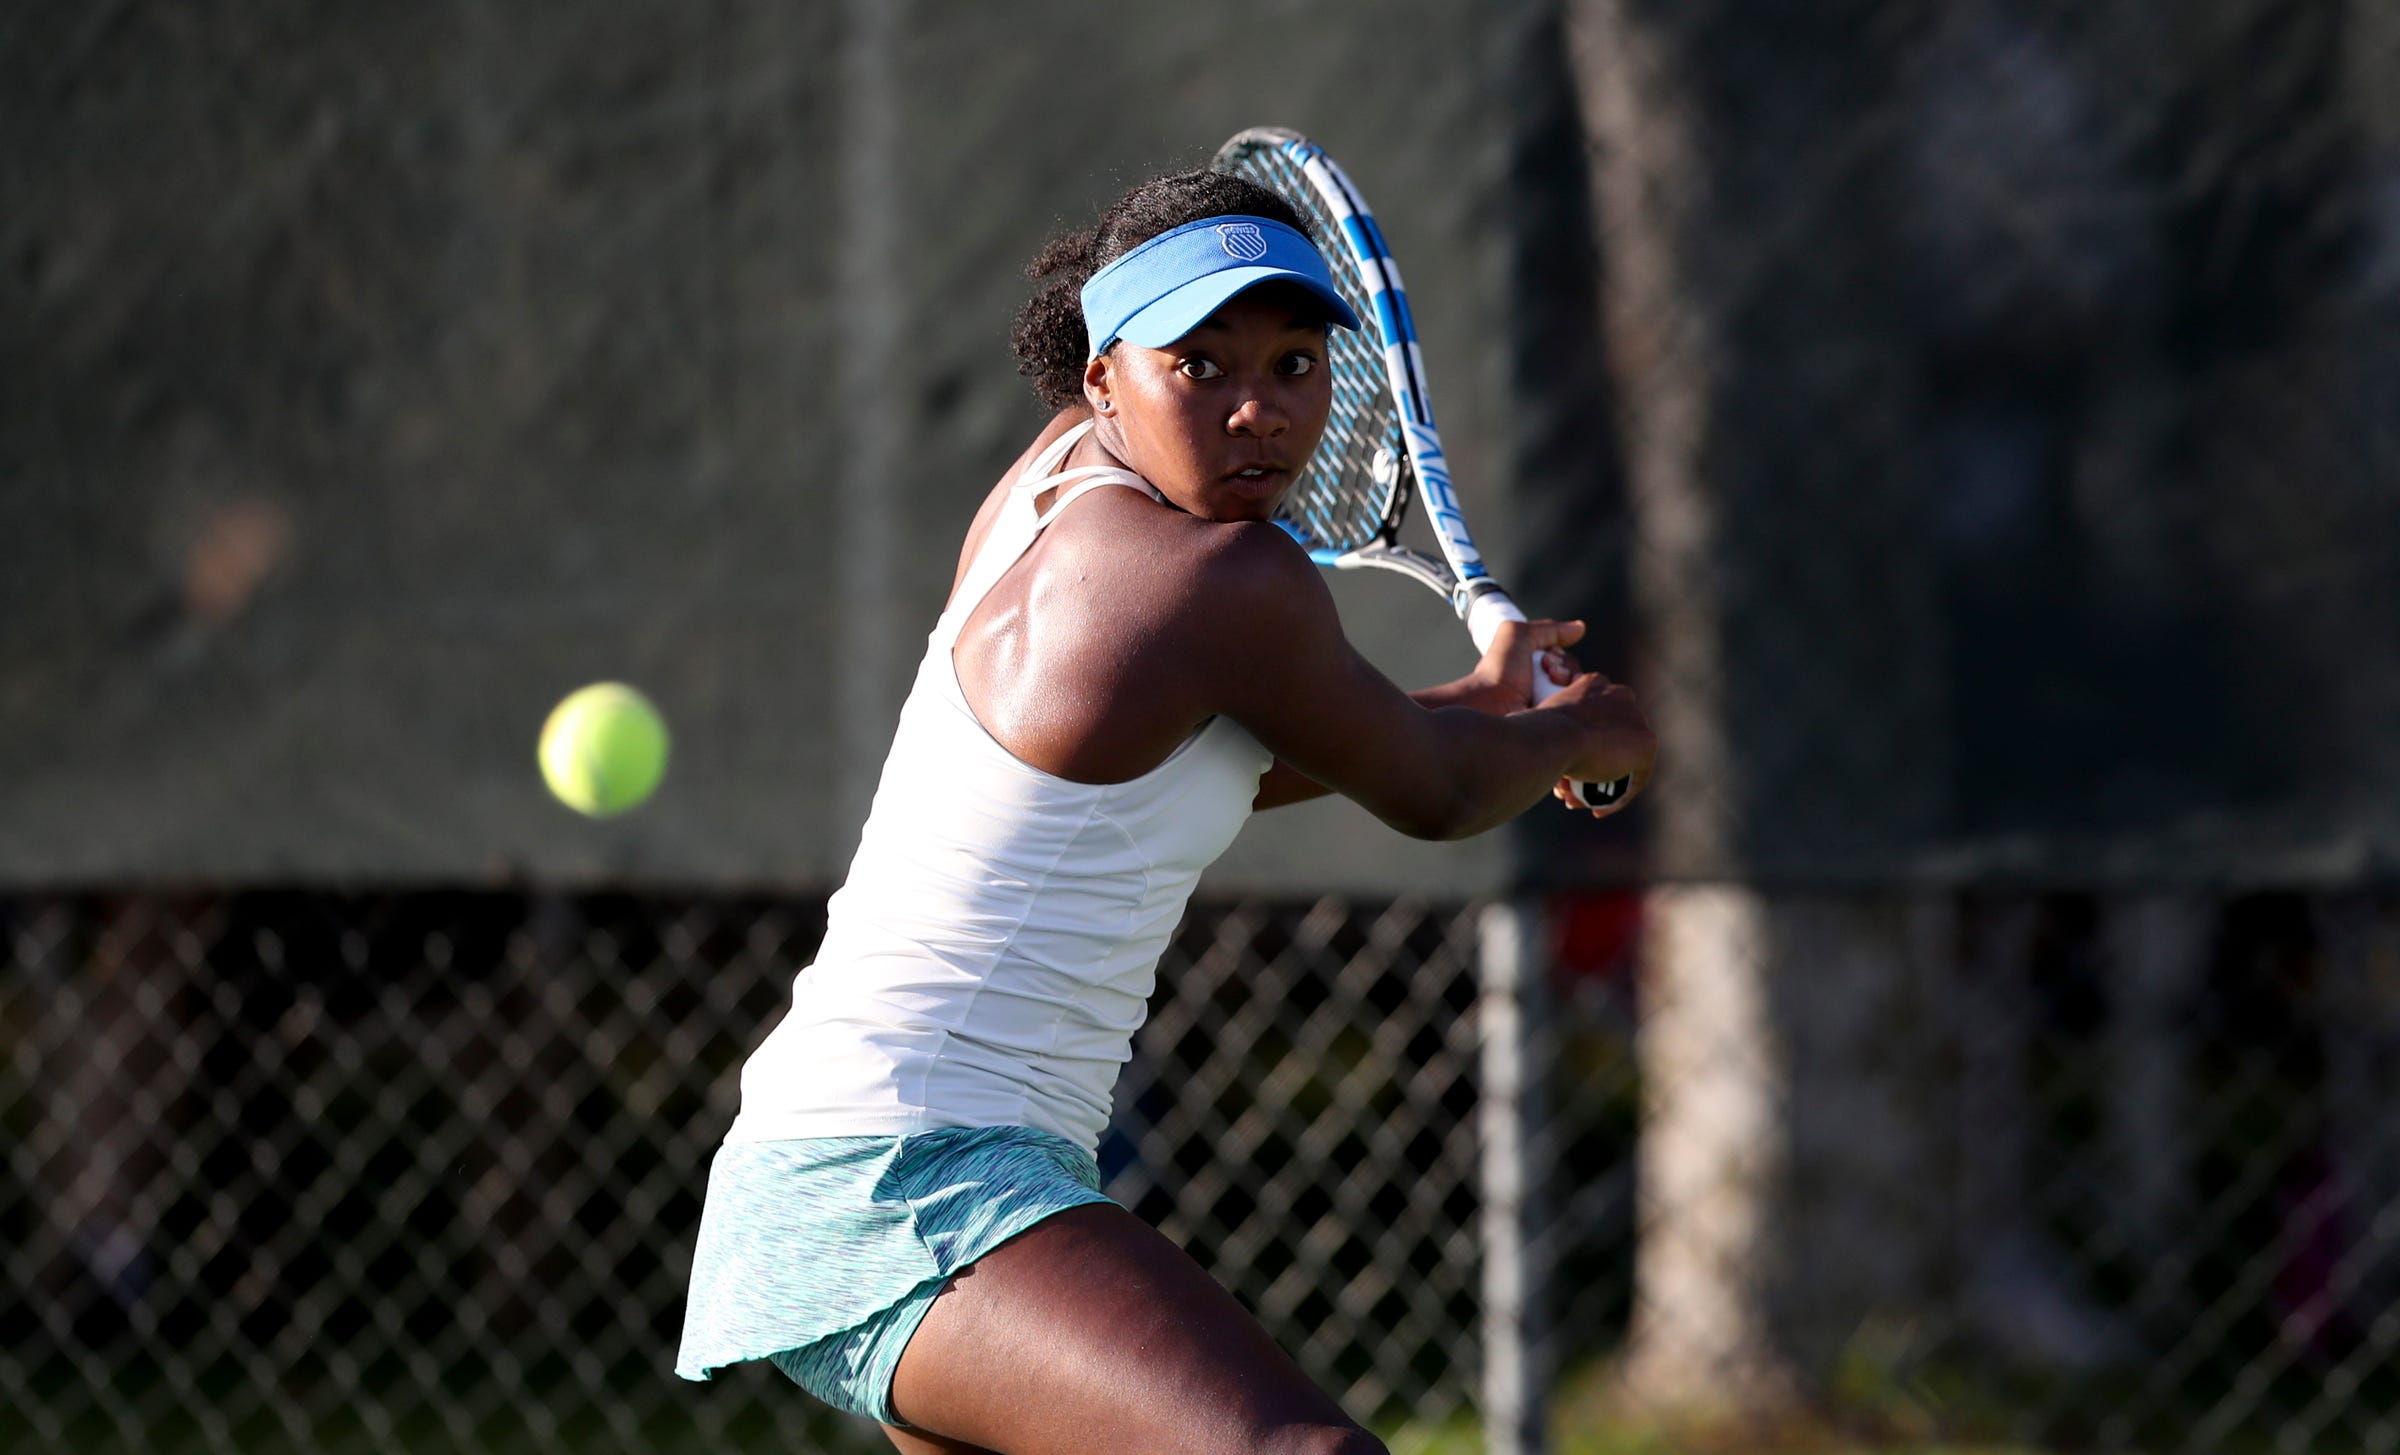 On the USTA Pro Circuit, money can be hard to come by